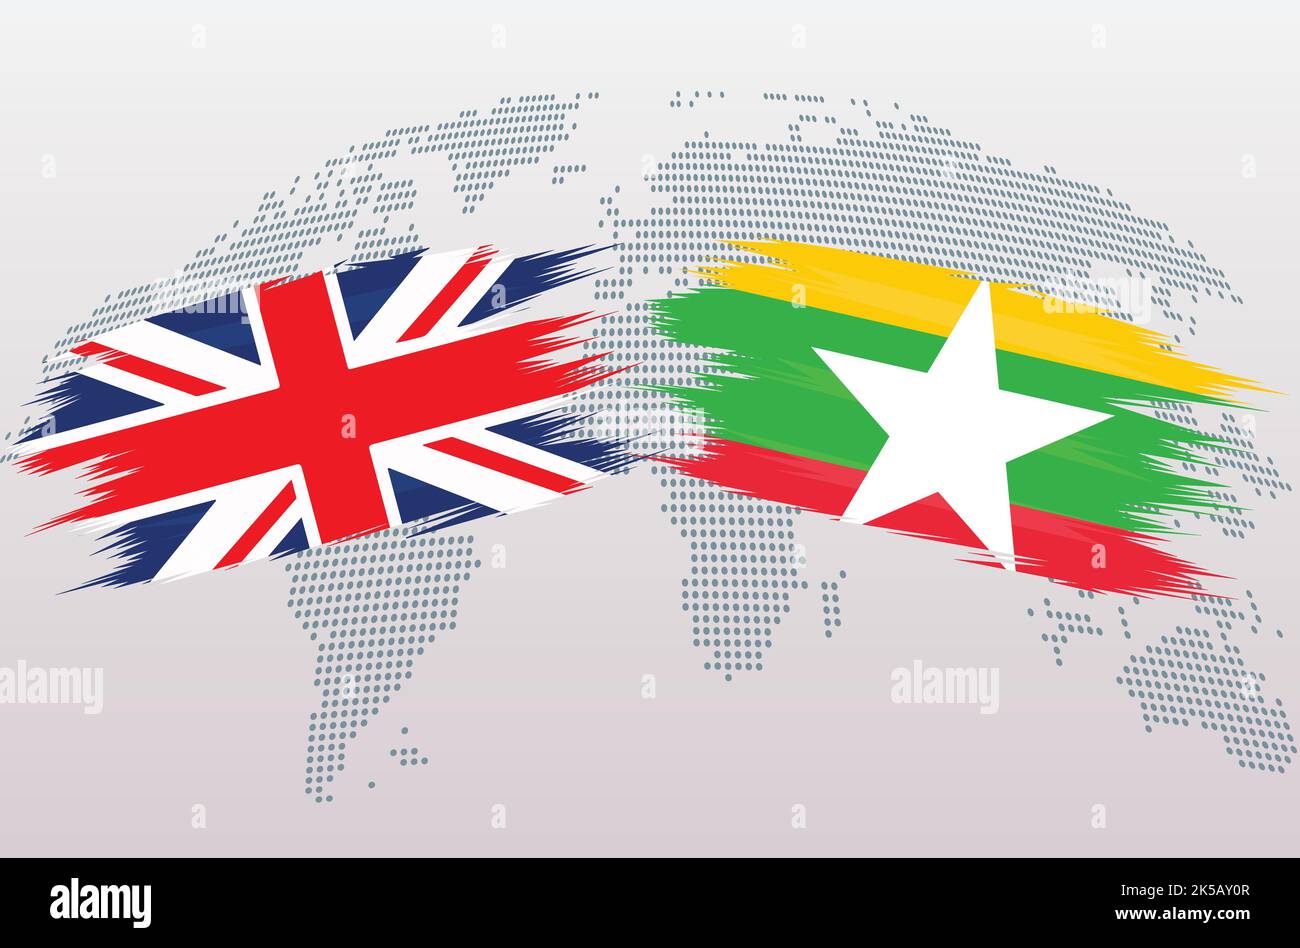 UK Great Britain and Myanmar Burma flags. The United Kingdom Myanmar Burma flags, isolated on grey world map background. Vector illustration. Stock Vector